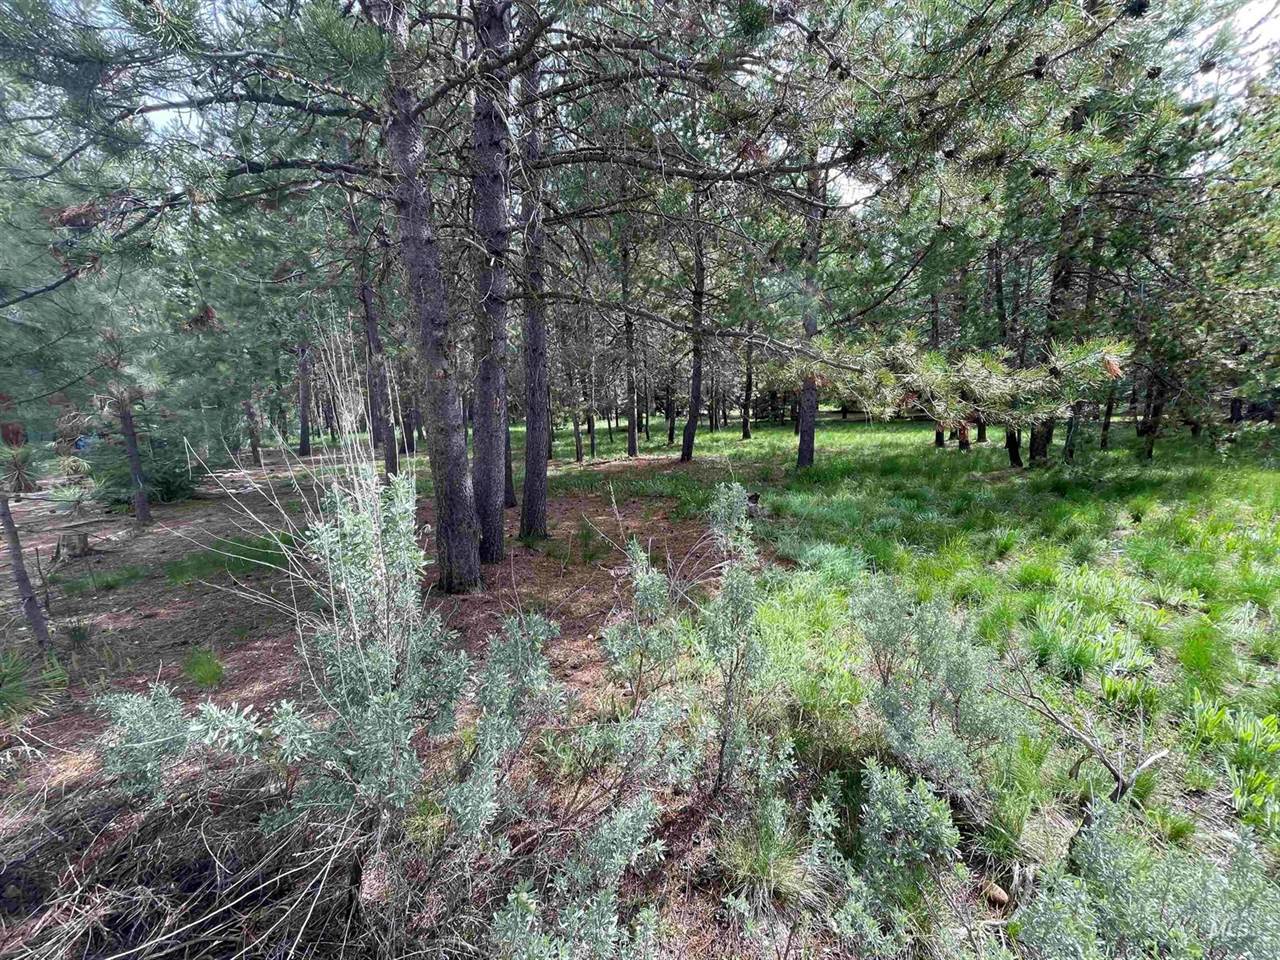 203 Mcleod Ln, Donnelly, ID 83615